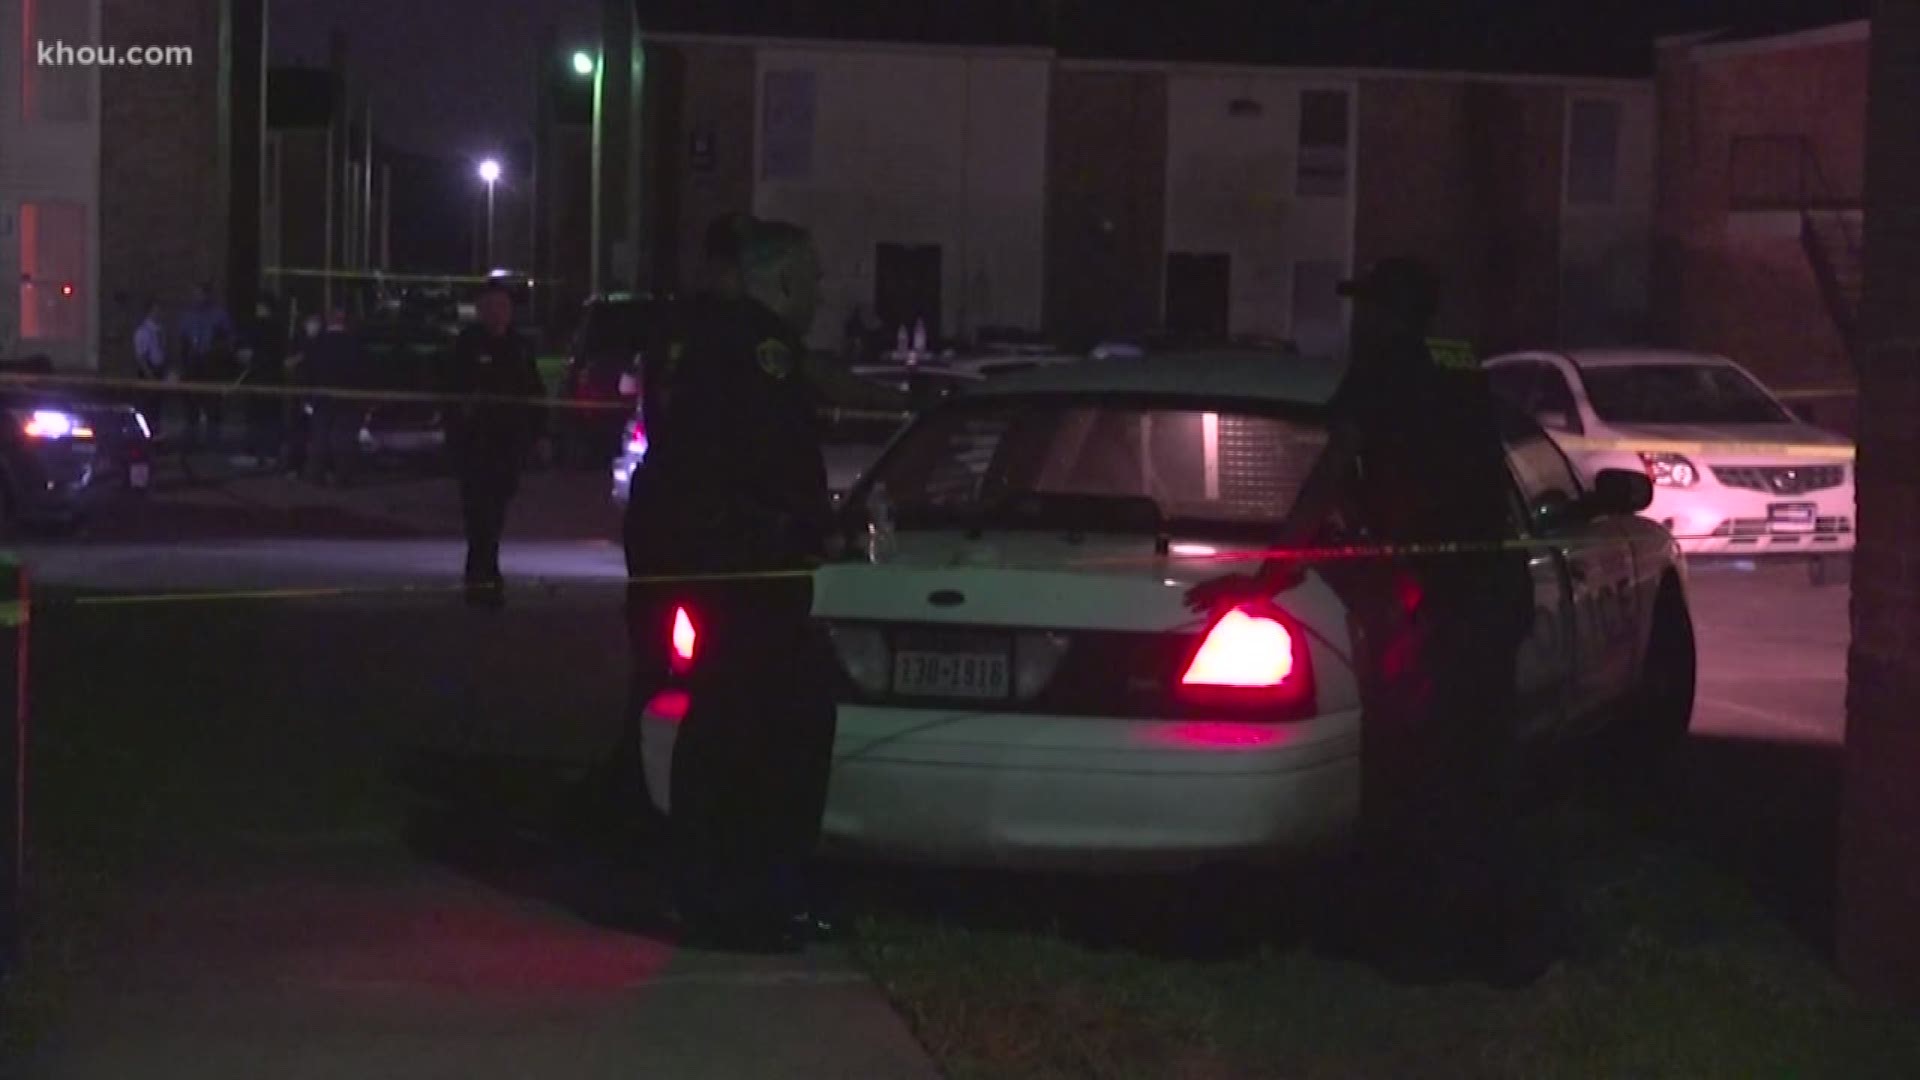 Houston police officers shot and killed a man at a southeast Houston apartment complex after they say the man pointed a pistol at them.